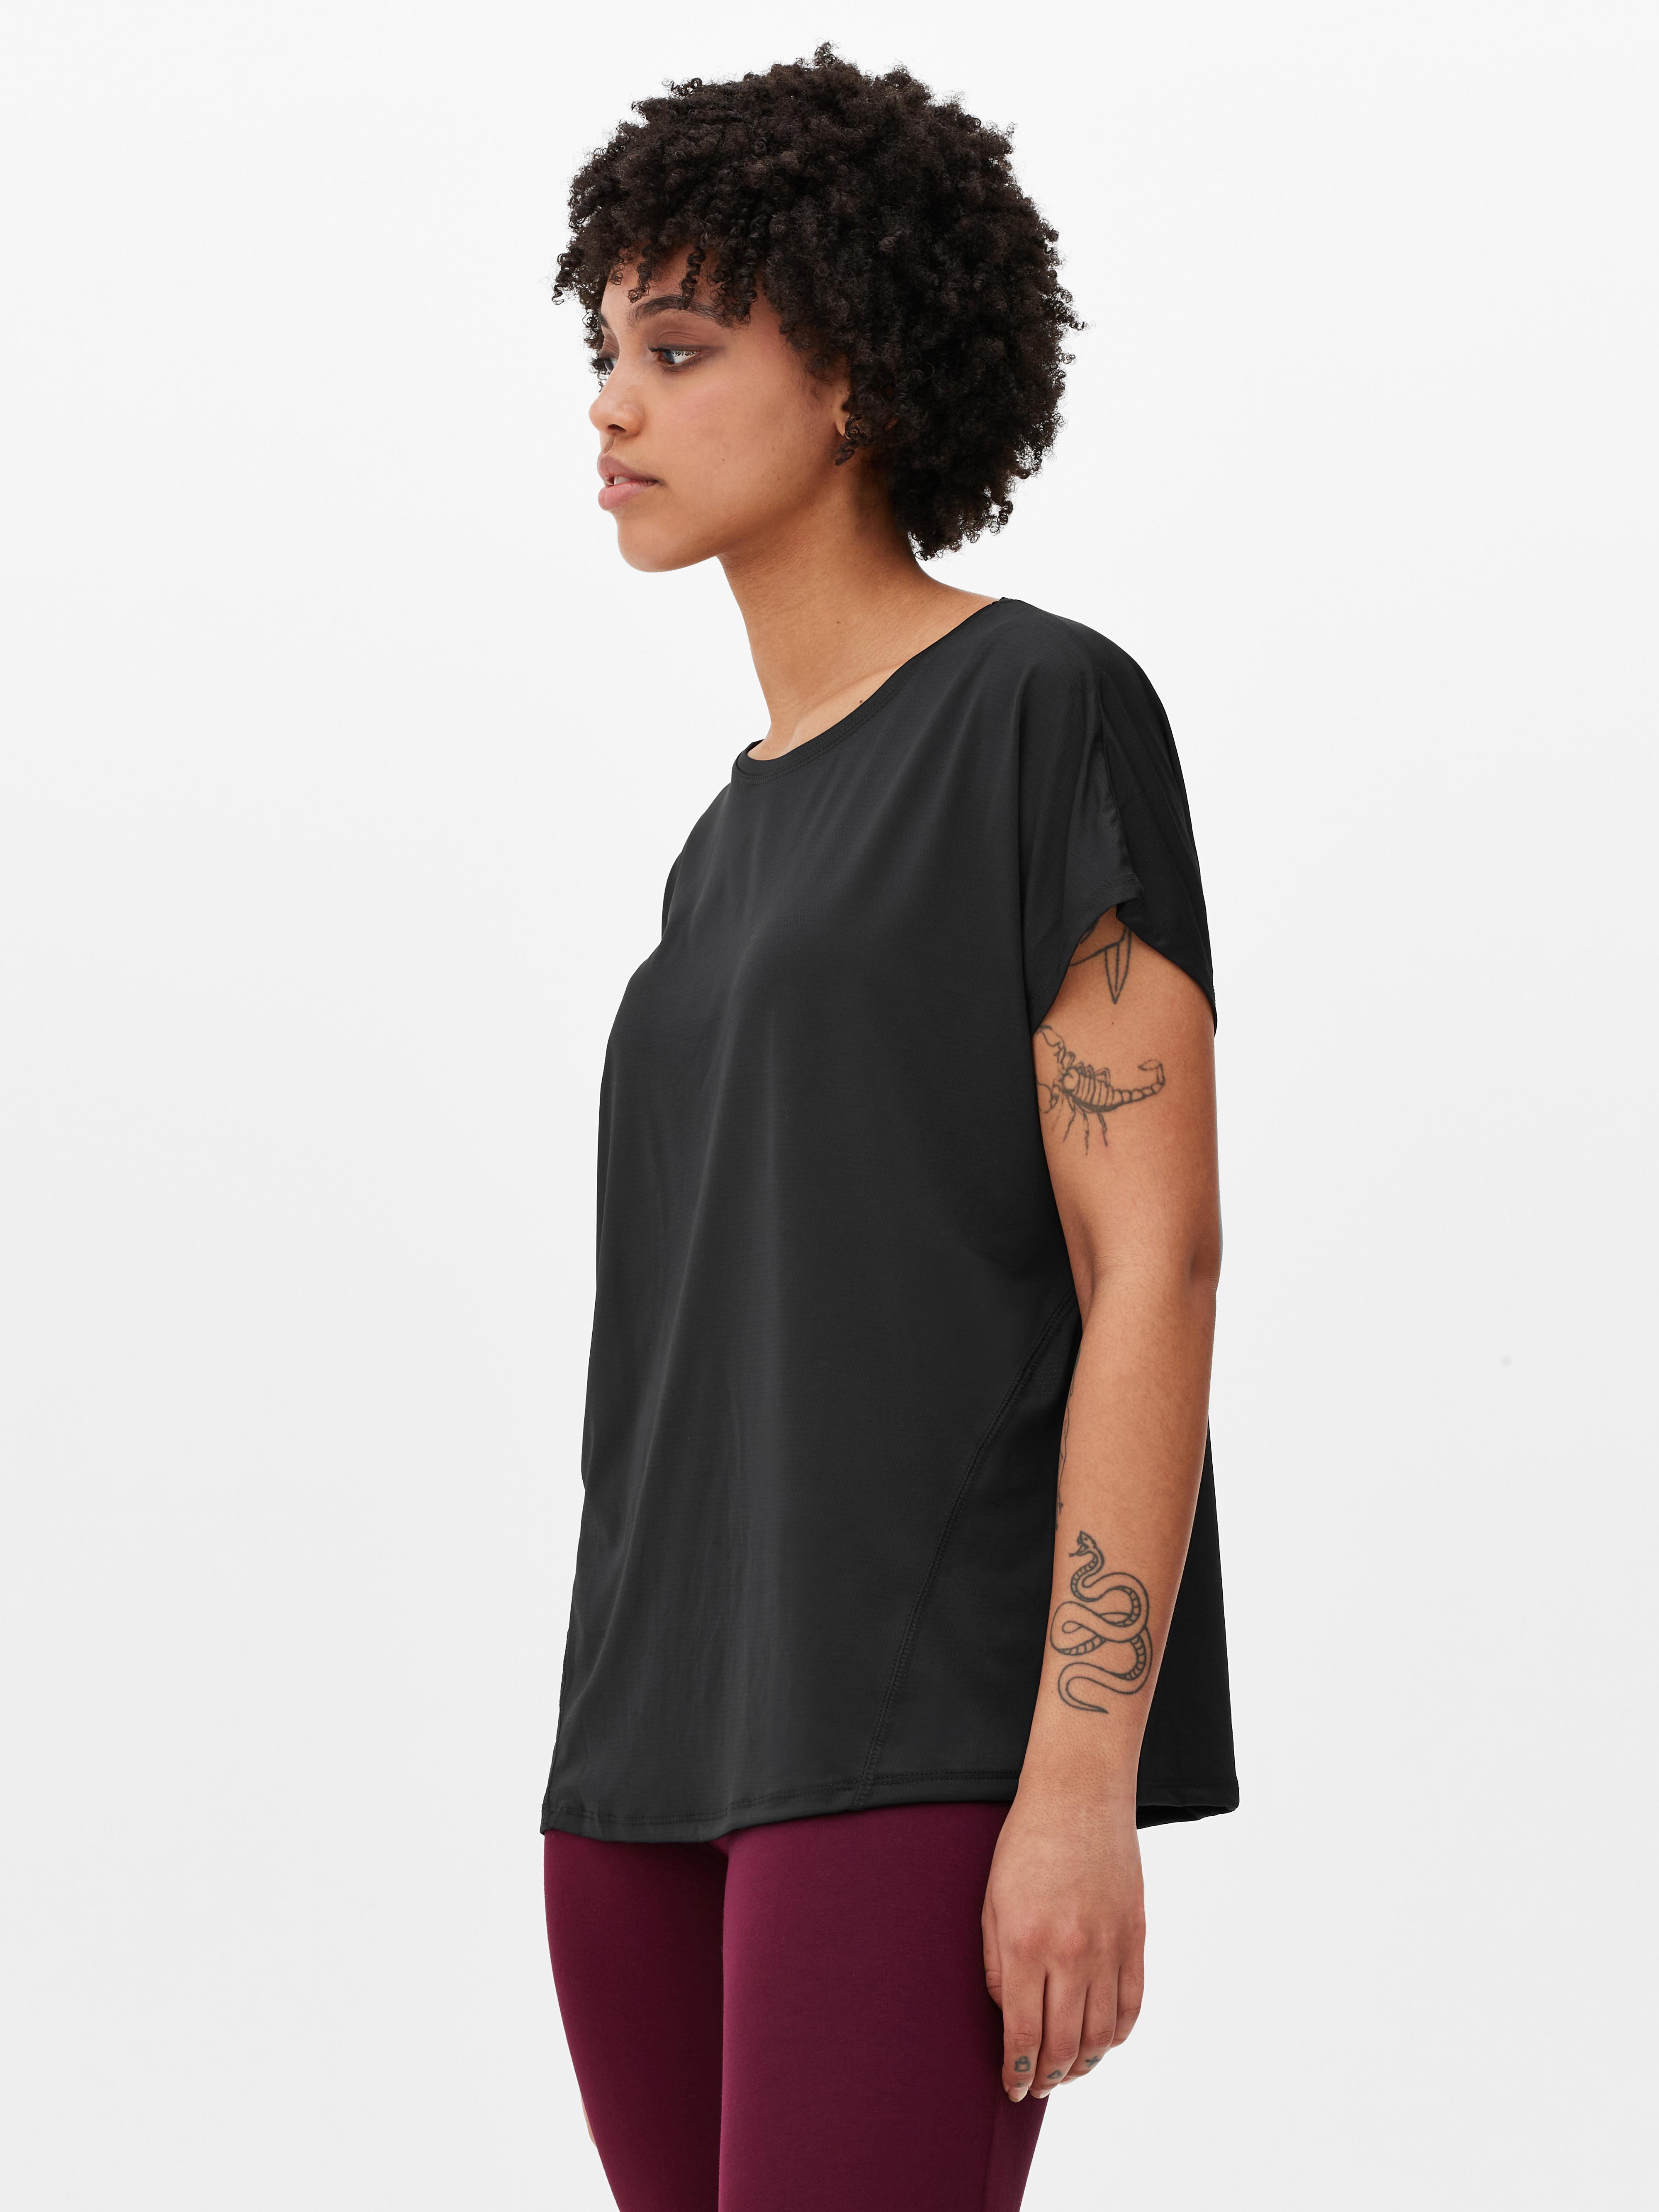 Perforated Performance T-shirt